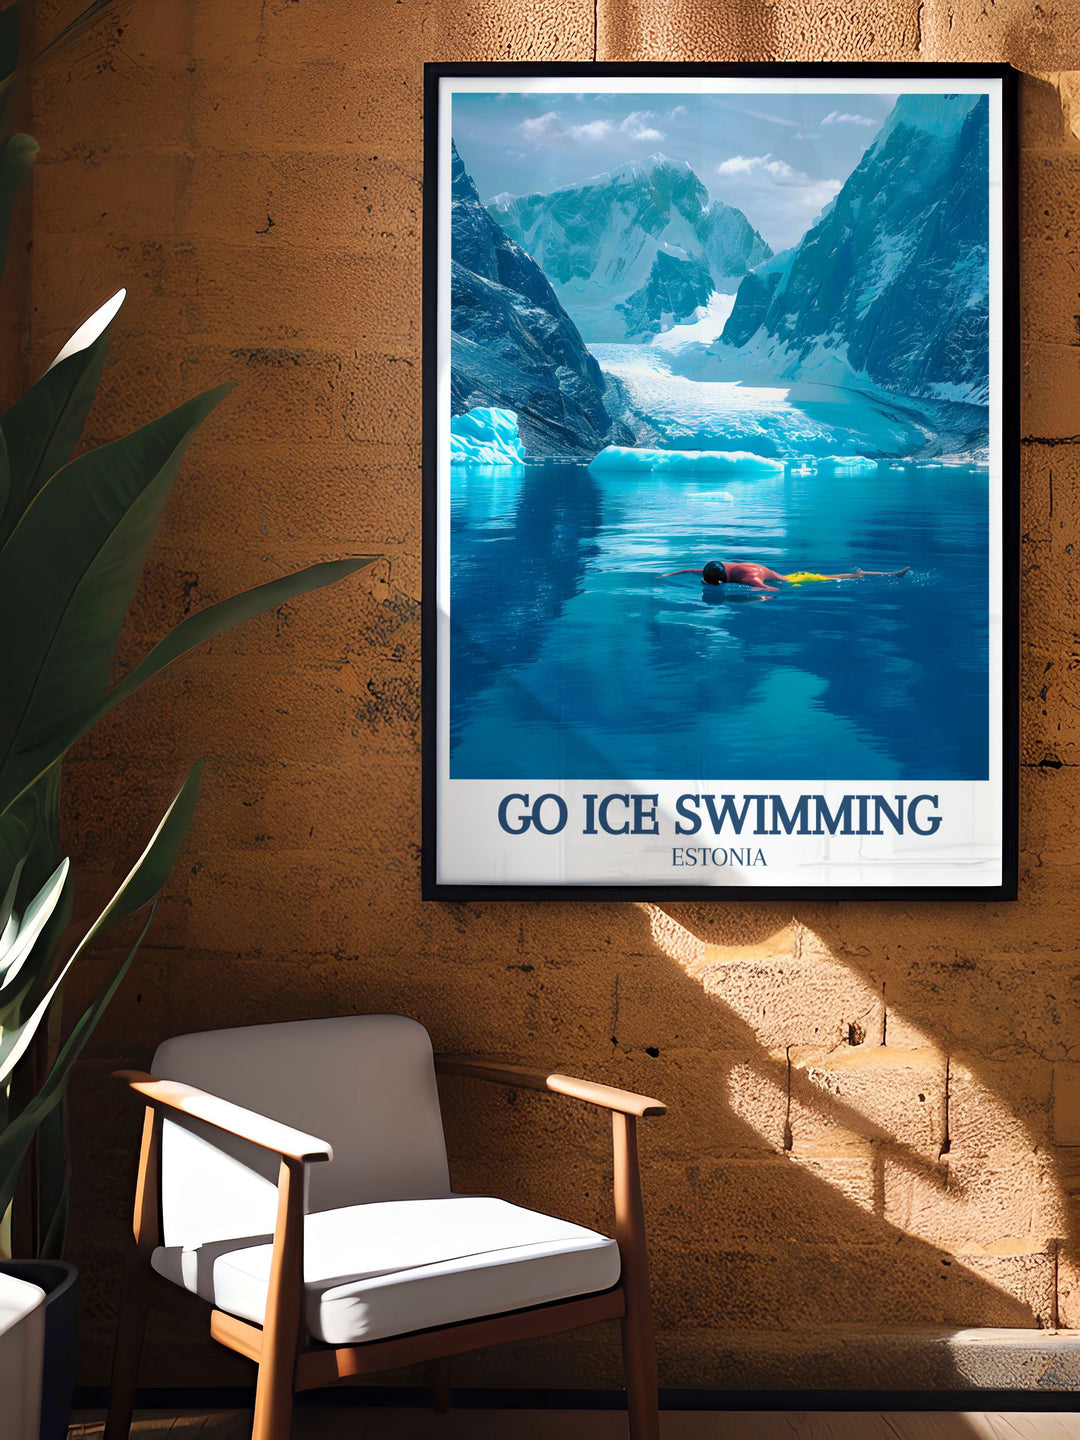 Travel poster showcasing the excitement of ice swimming at the Ross Ice Shelf, with intricate details and vibrant colors that bring the icy wilderness of Antarctica to life.